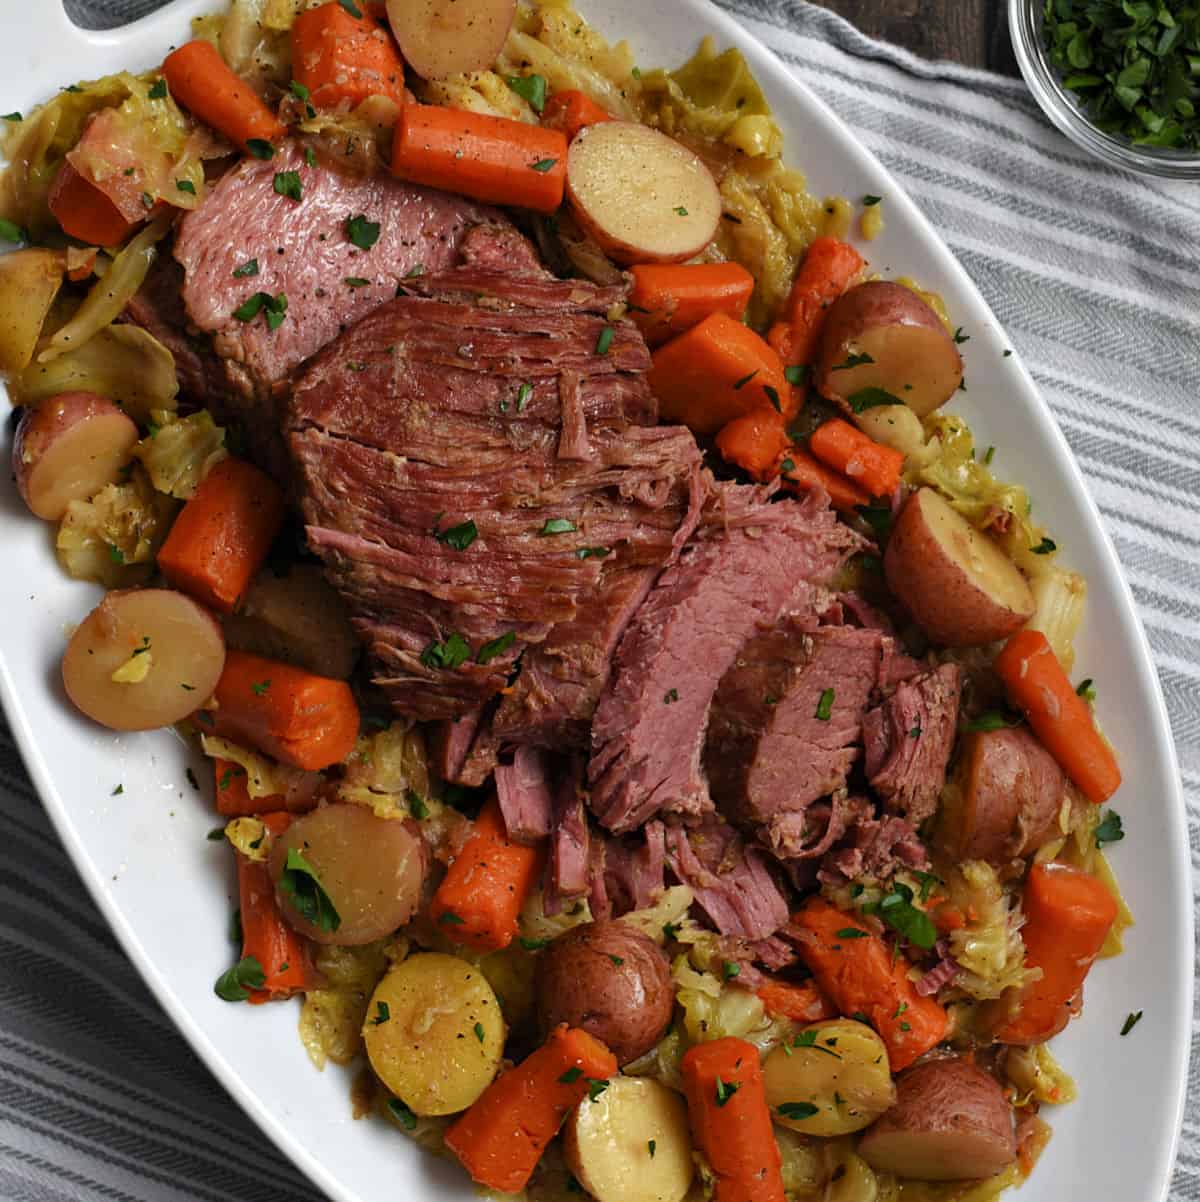 Sliced corned beef, cabbage, red potatoes and carrots on a large platter.